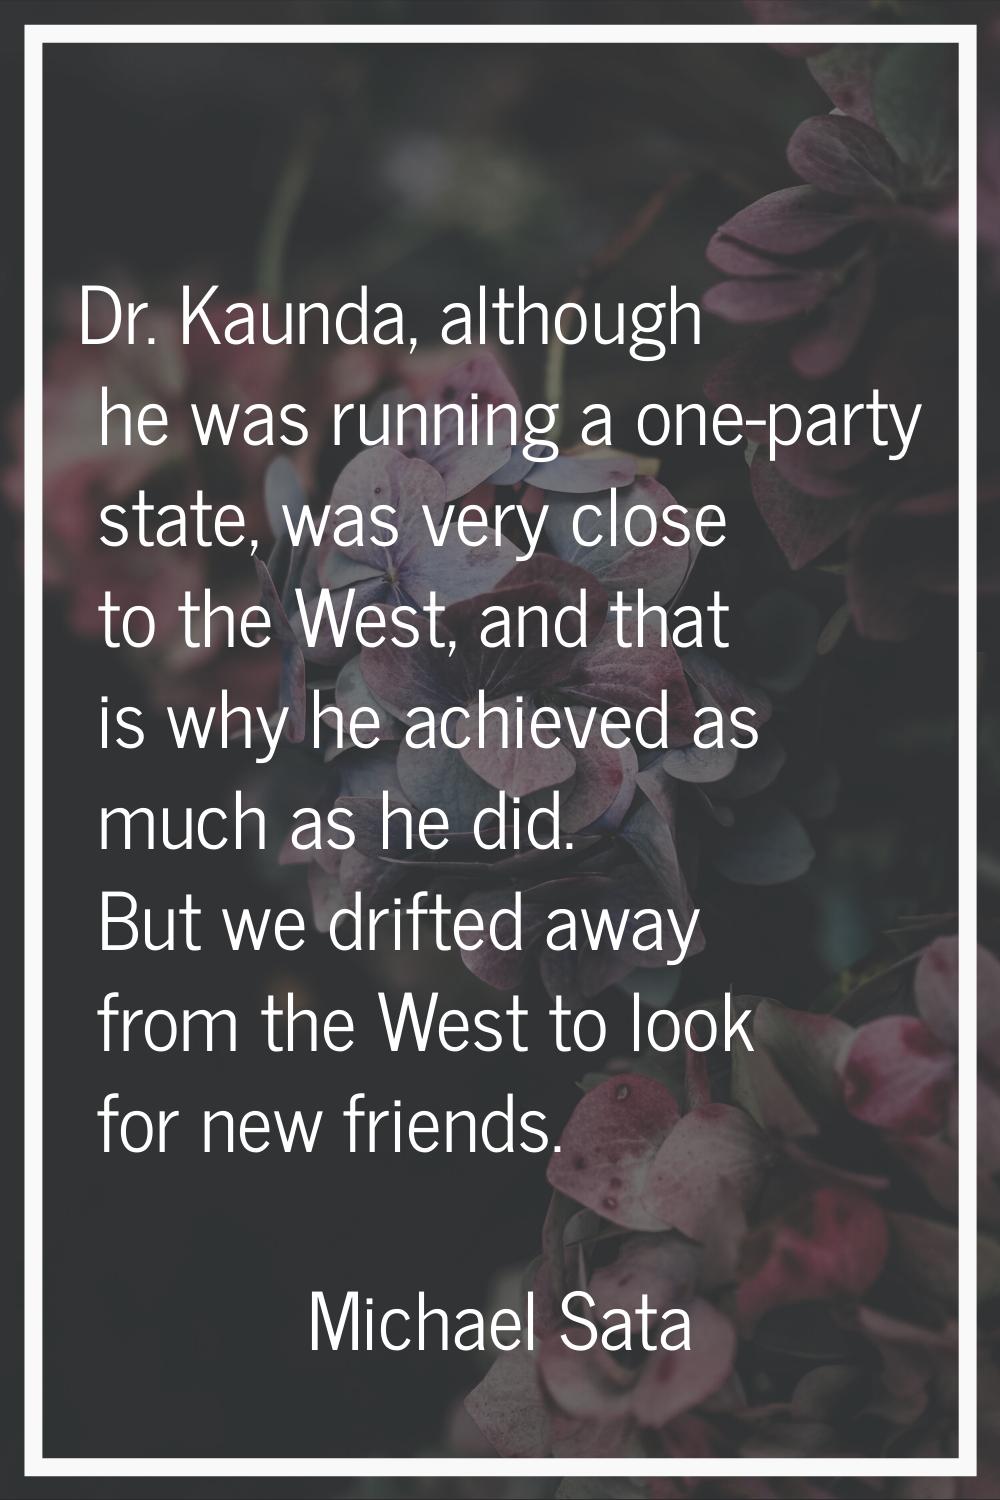 Dr. Kaunda, although he was running a one-party state, was very close to the West, and that is why 